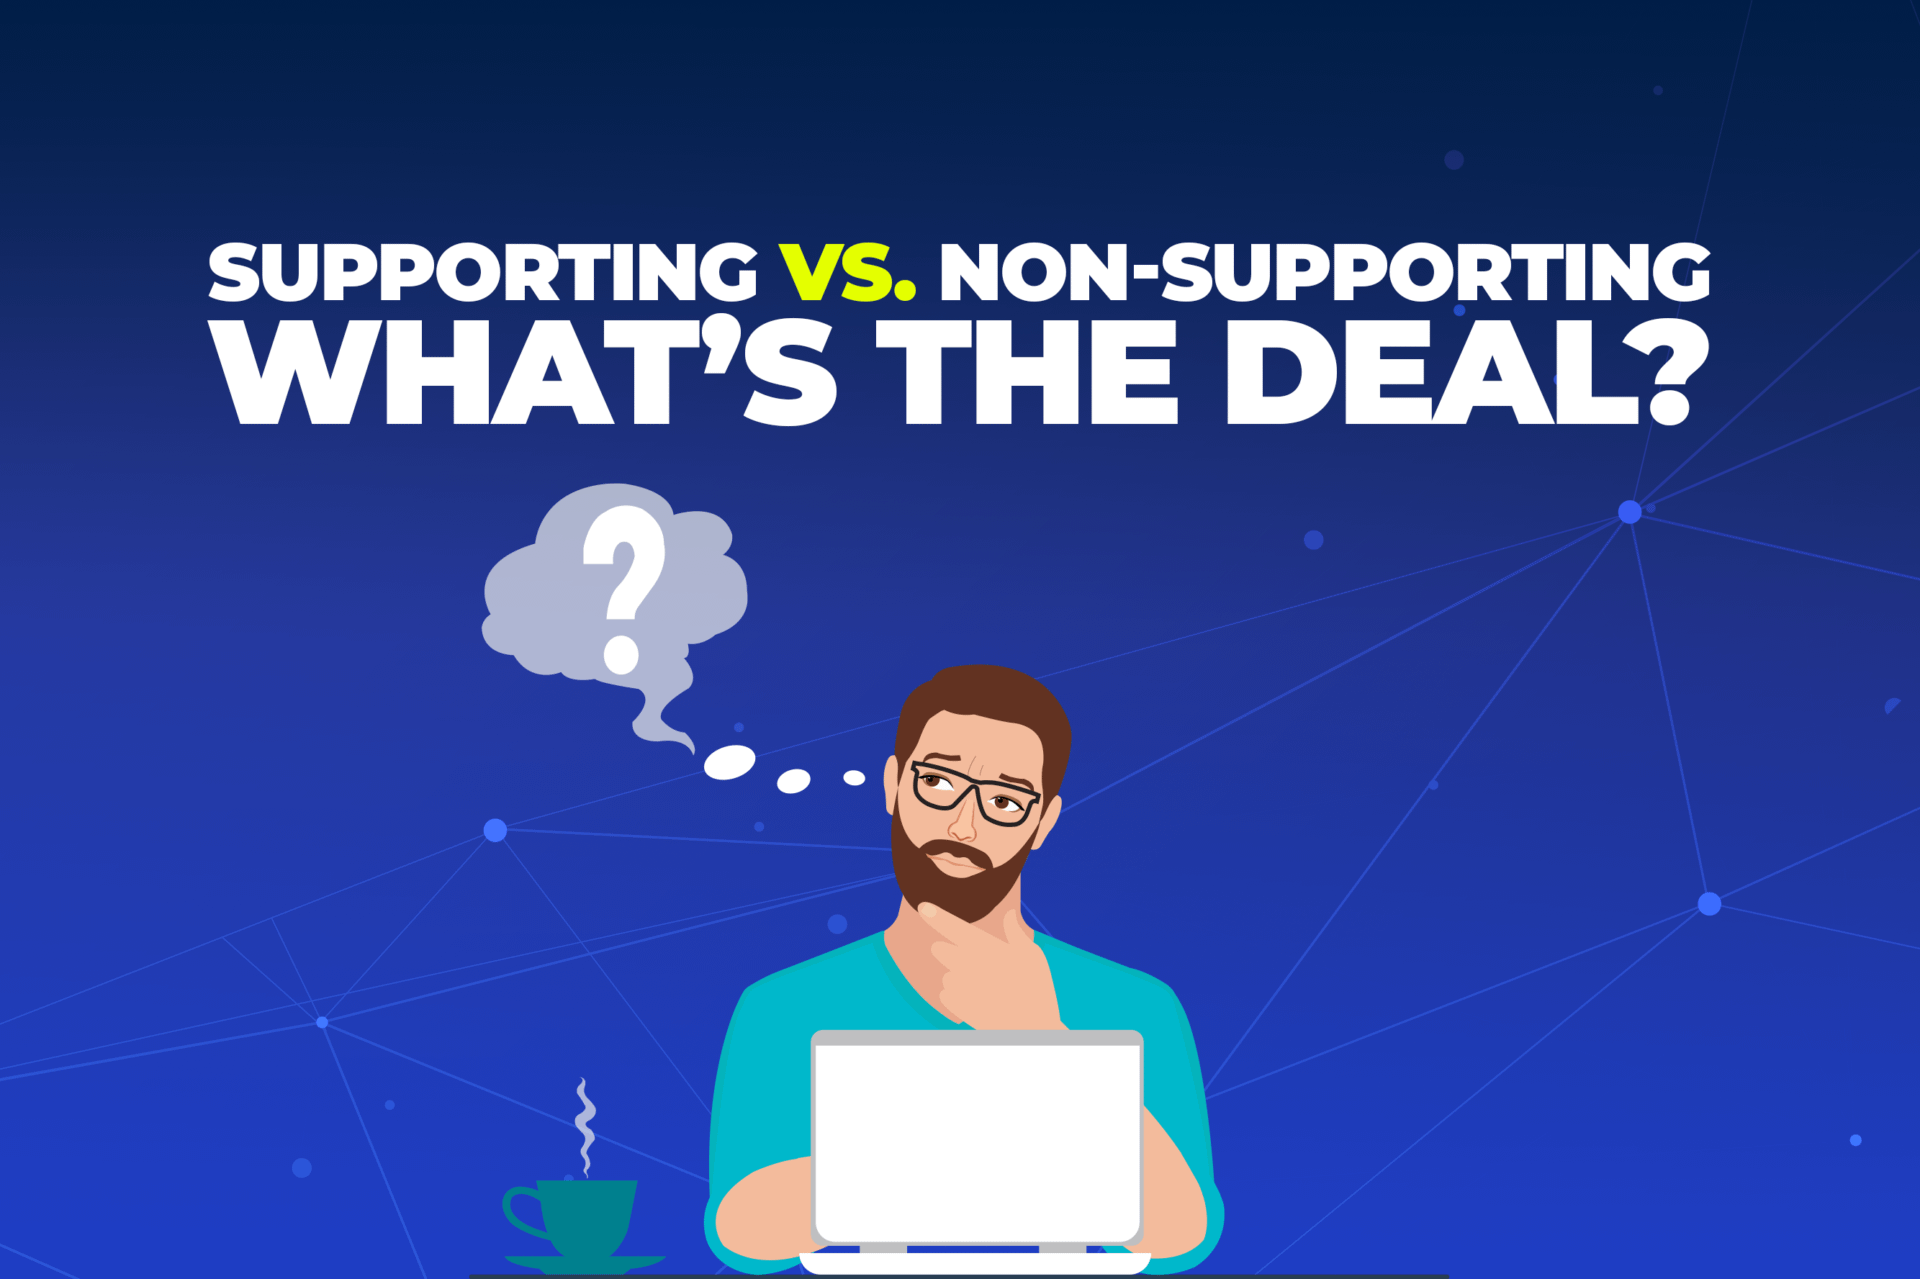 Supporting vs non-supporting brands